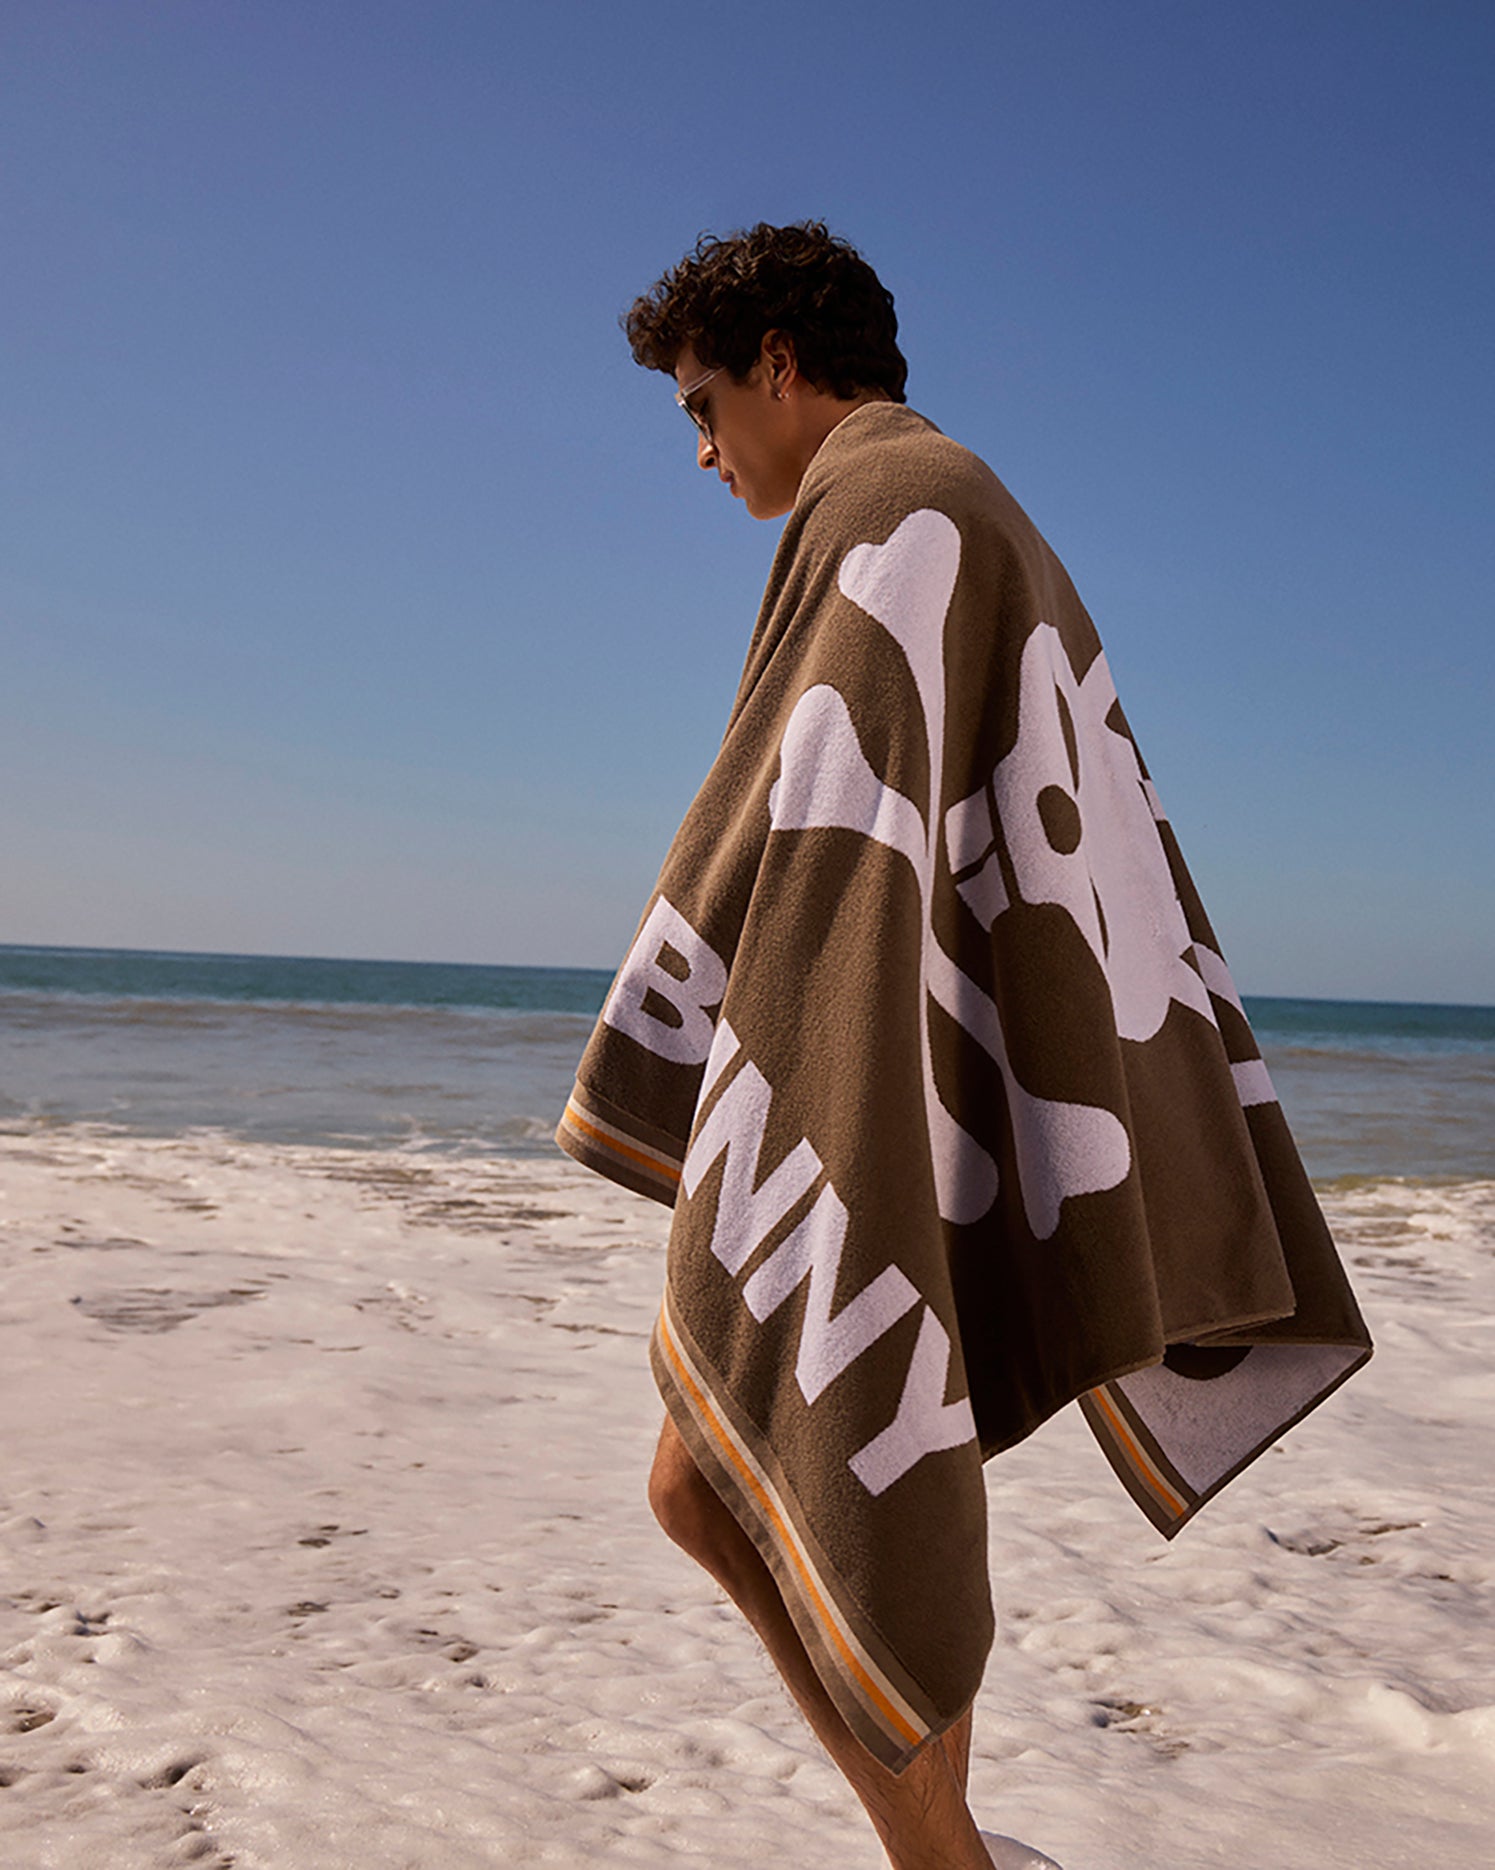 A person with short dark hair stands on a sunny beach, wrapped in the Psycho Bunny BEACH TOWEL - B6A393B200 featuring a large white skull and crossbones design. The ocean and blue sky are visible in the background. The jacquard-knit Bunny logo and text adorn the striped border at the bottom of the towel.